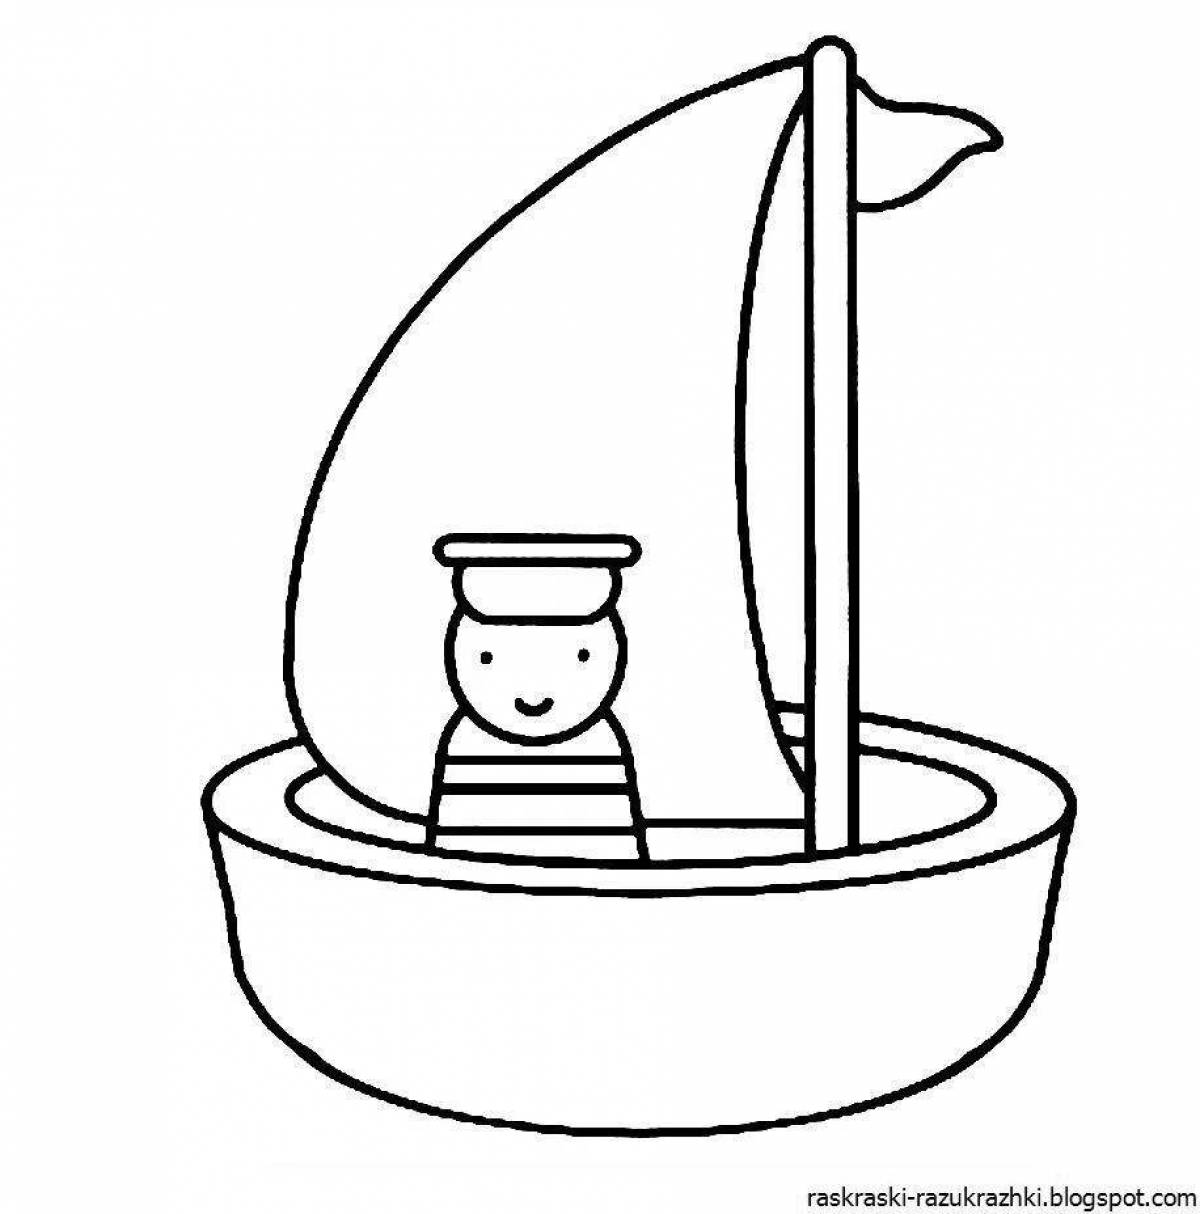 Awesome boat coloring book for kids